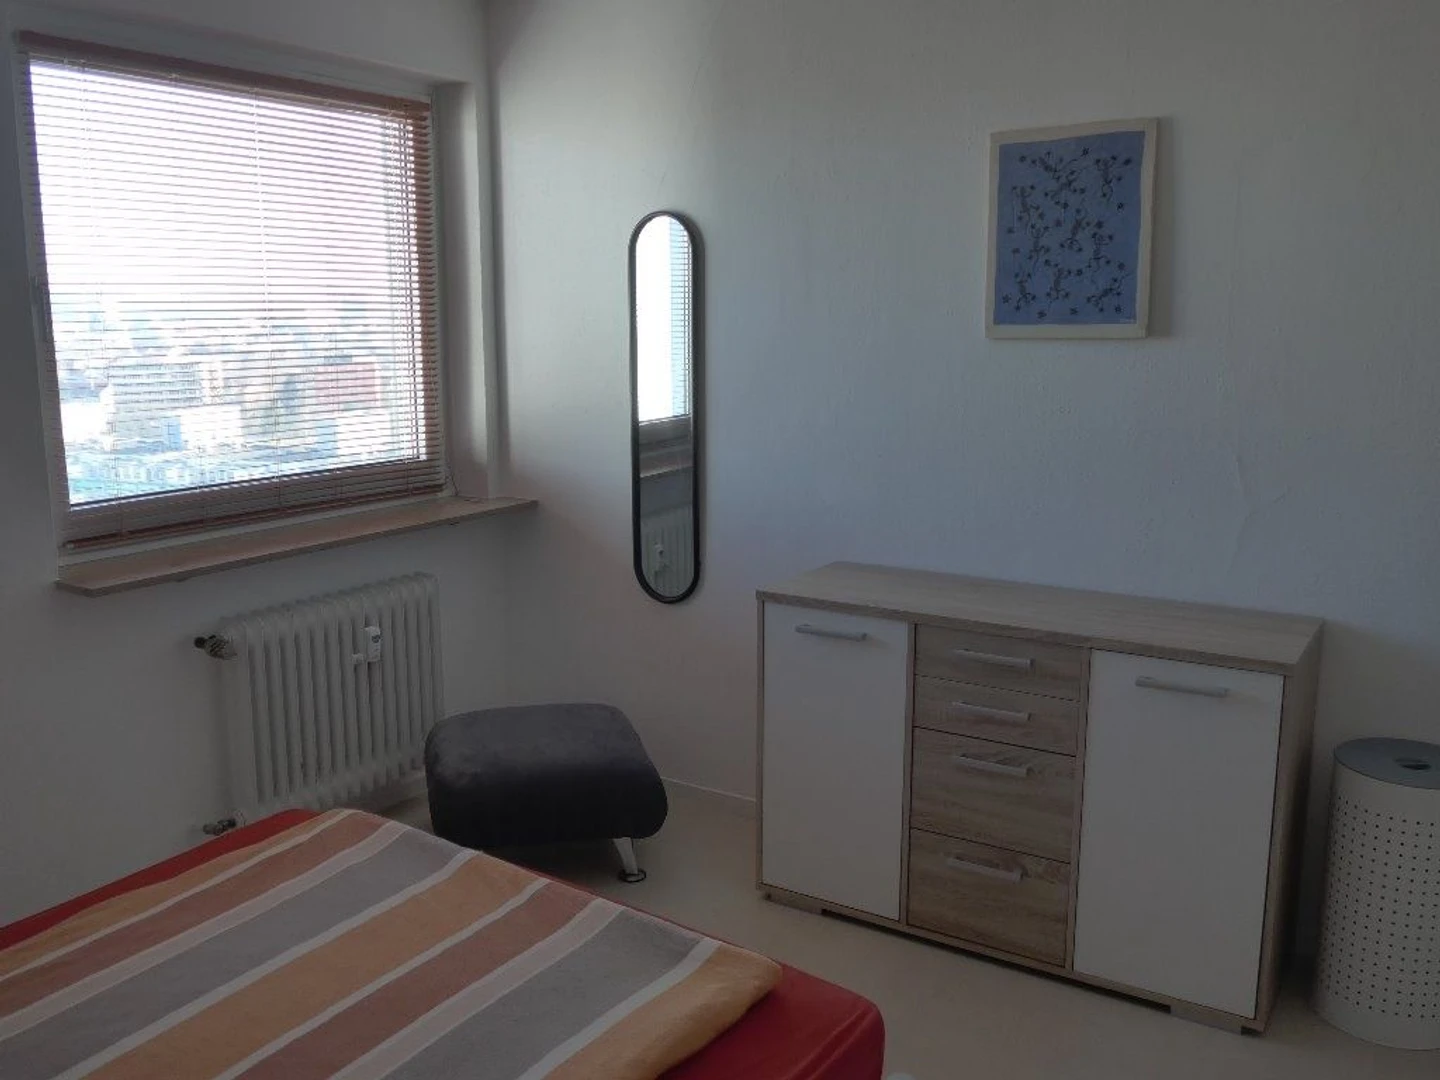 Cheap private room in Erlangen